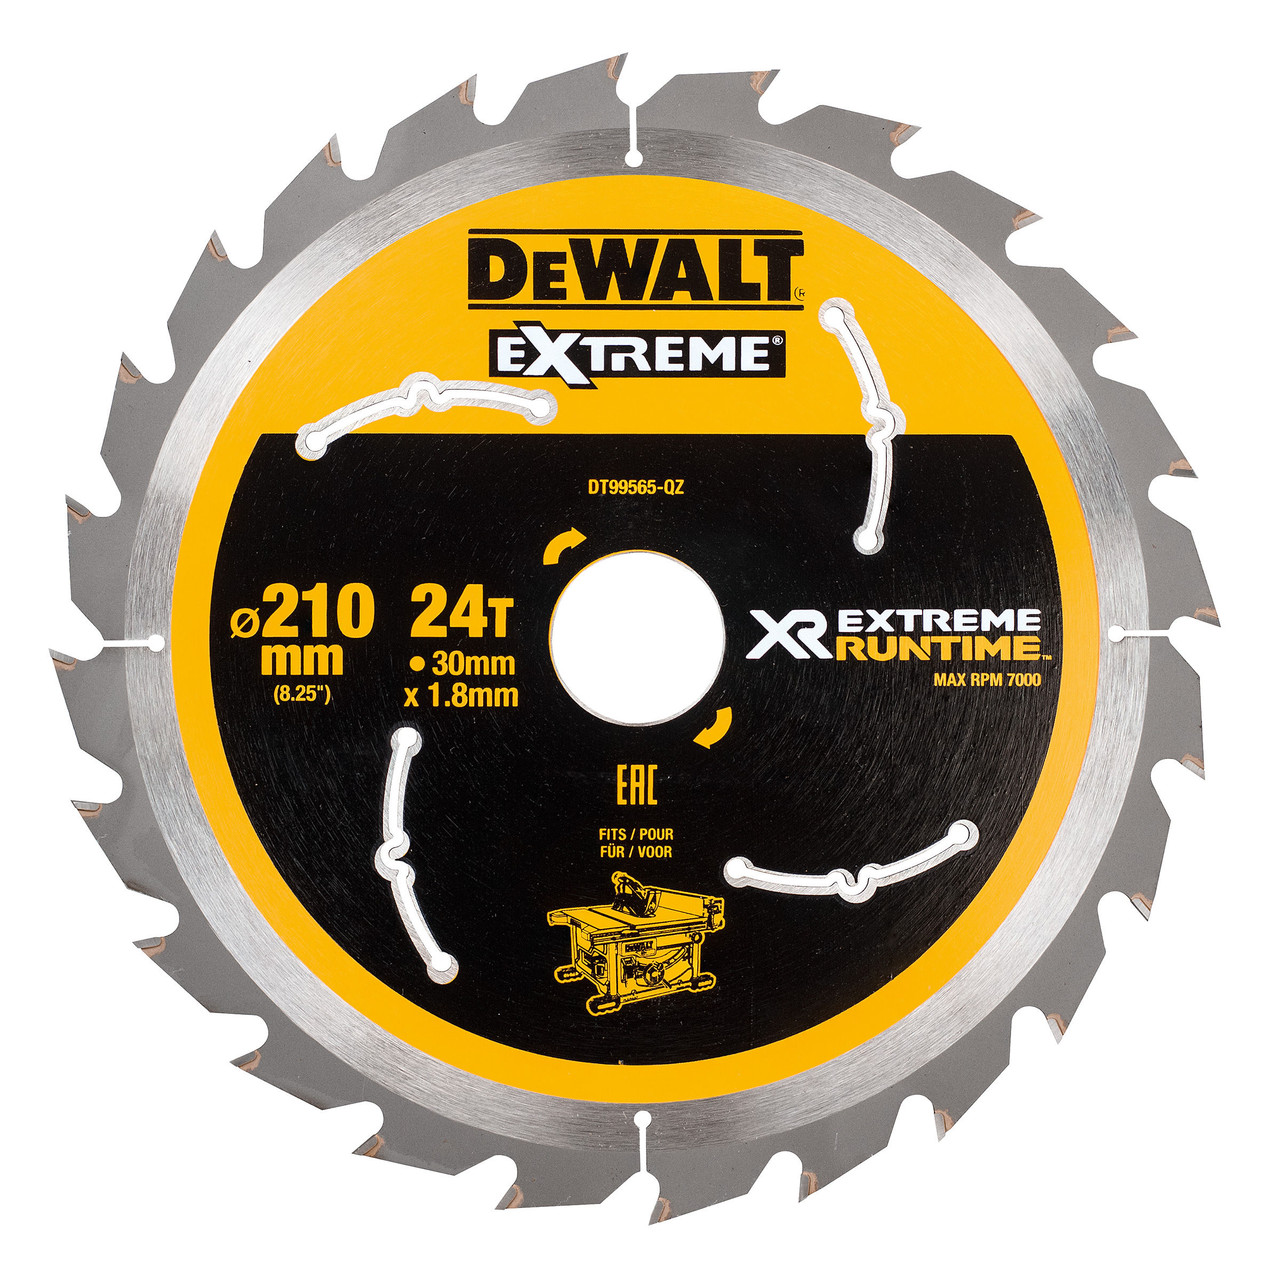 Photos - Chain / Reciprocating Saw Blade DeWALT DT99565 XR Extreme Runtime Table Saw Blade 210mm x 30mm x 24T 